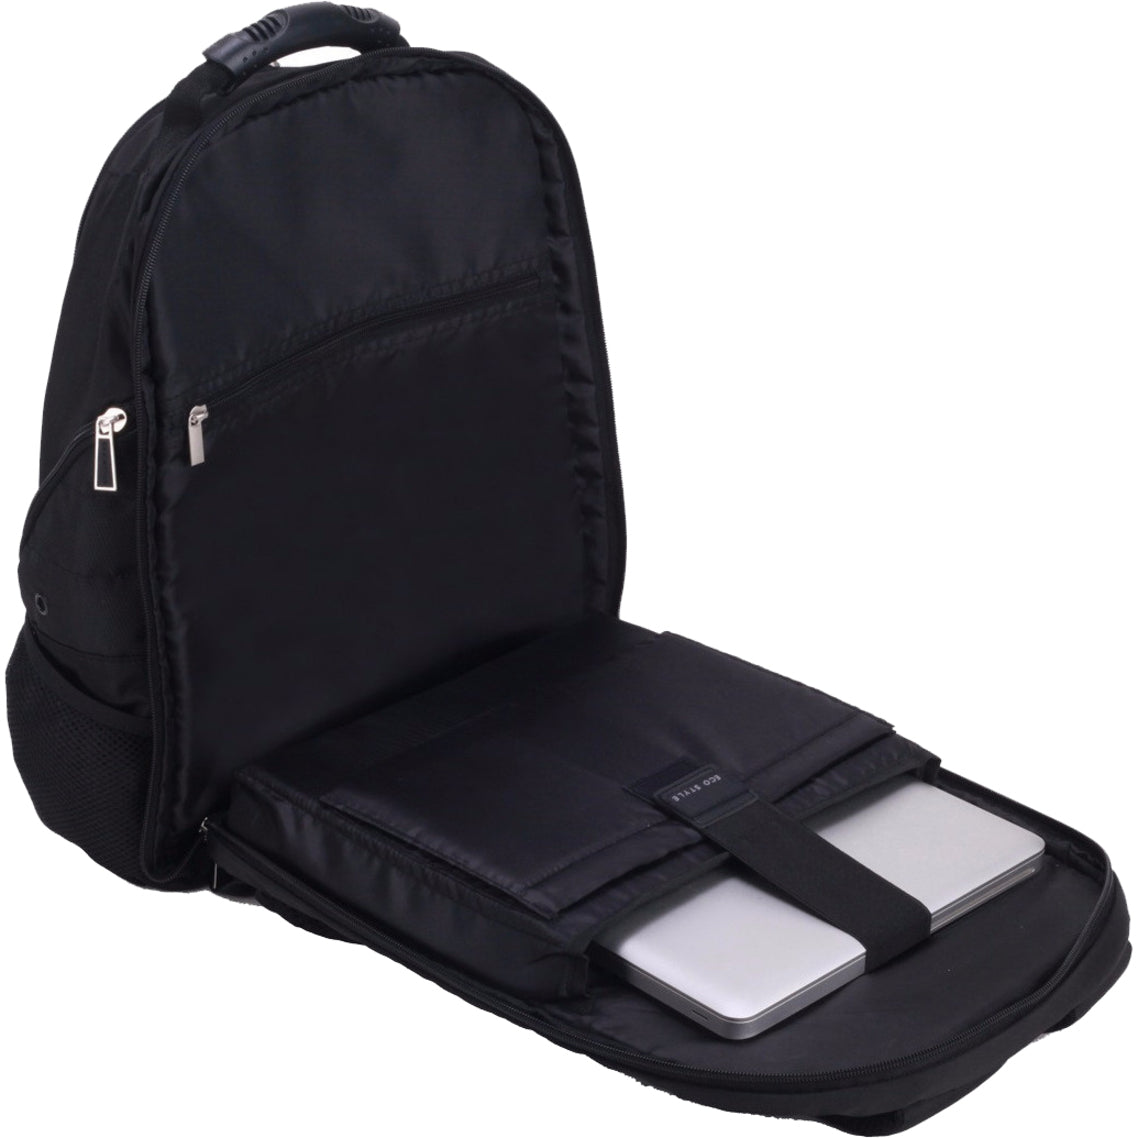 ECO STYLE EJSS-BP16-CF Jet Set Smart Backpack - Checkpoint Friendly, Fits Laptops up to 16" and iPad/Tablet